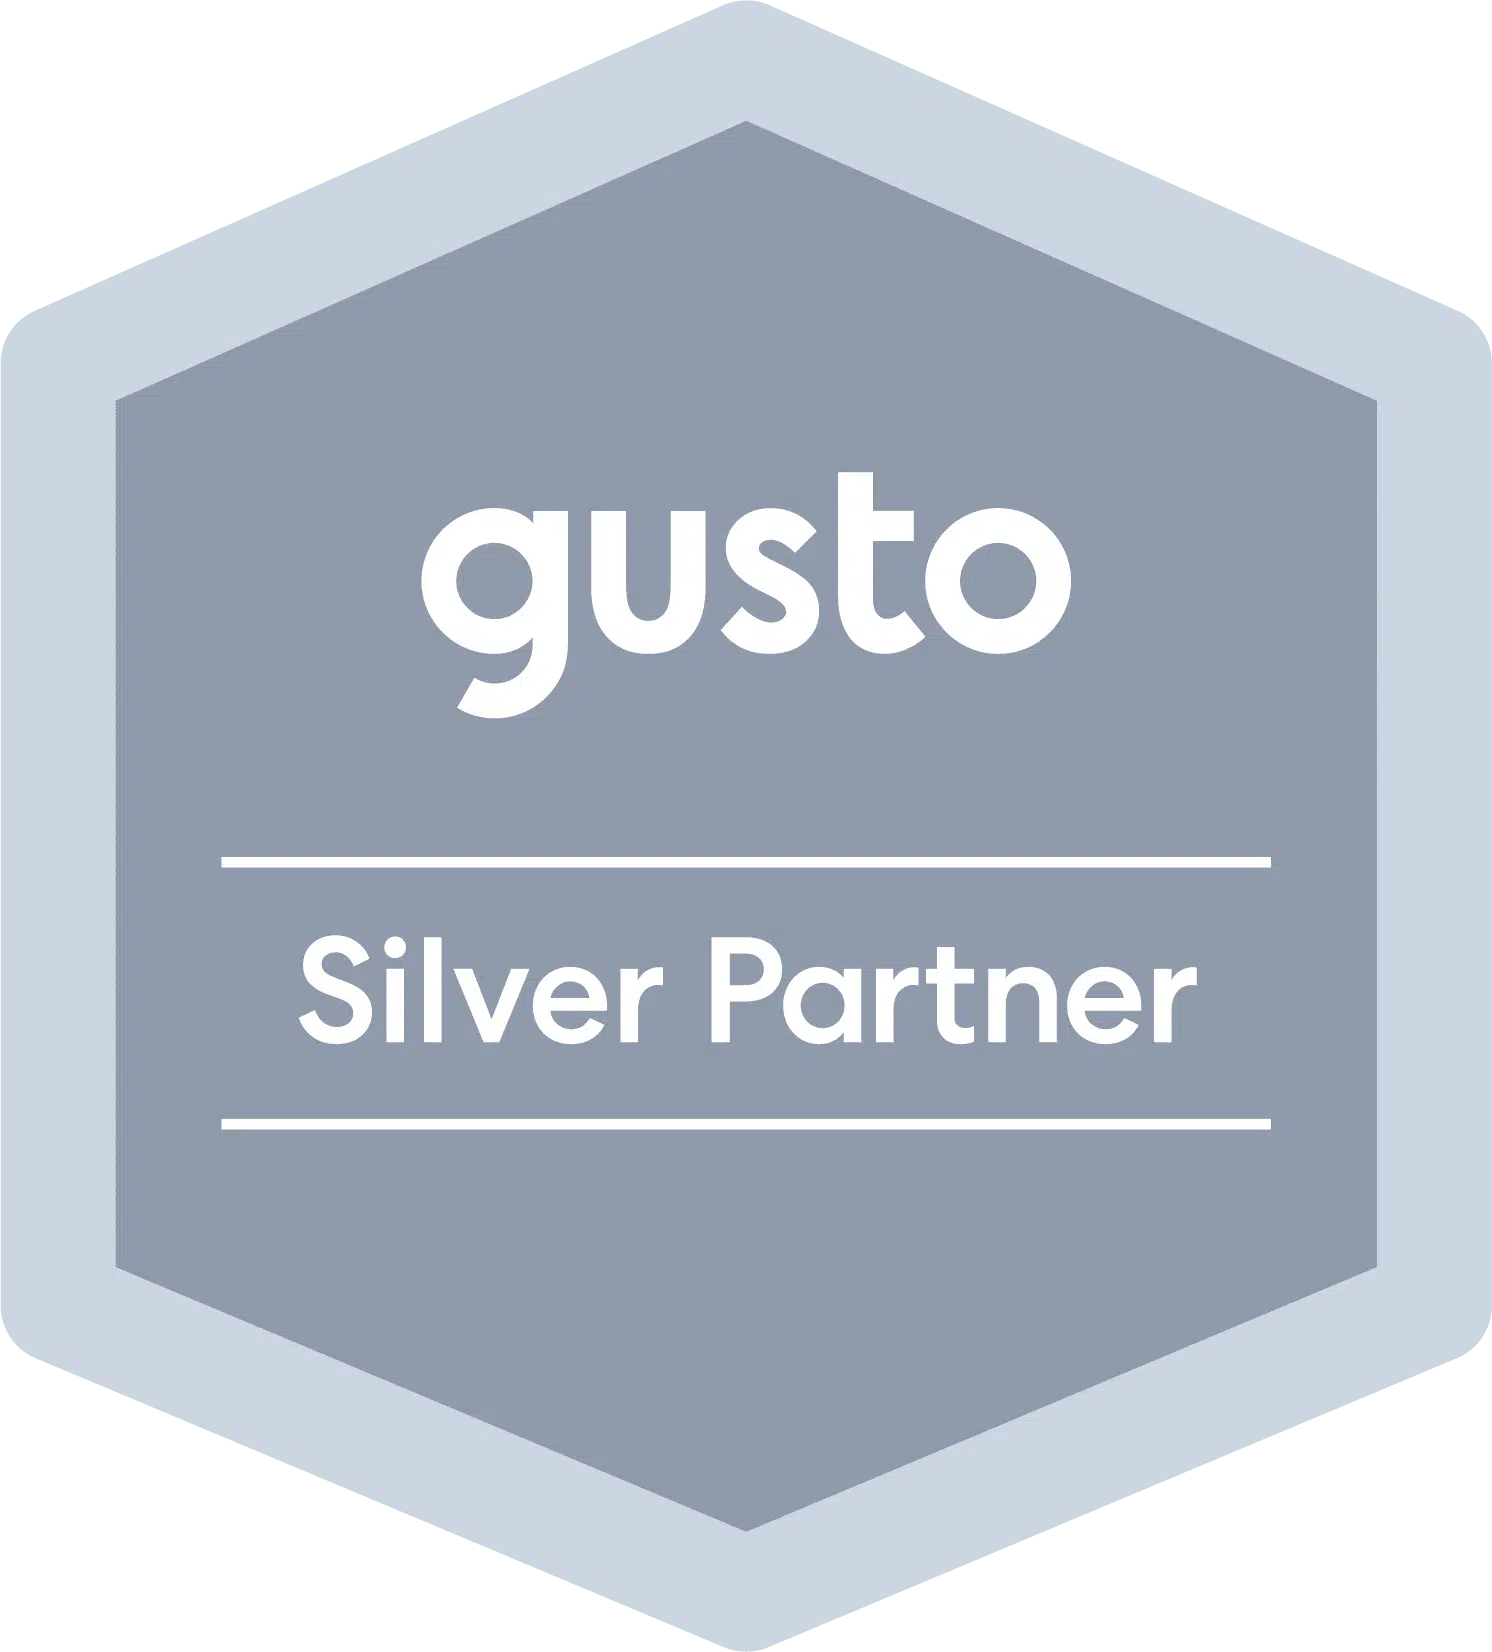 siver partner badge from Gusto